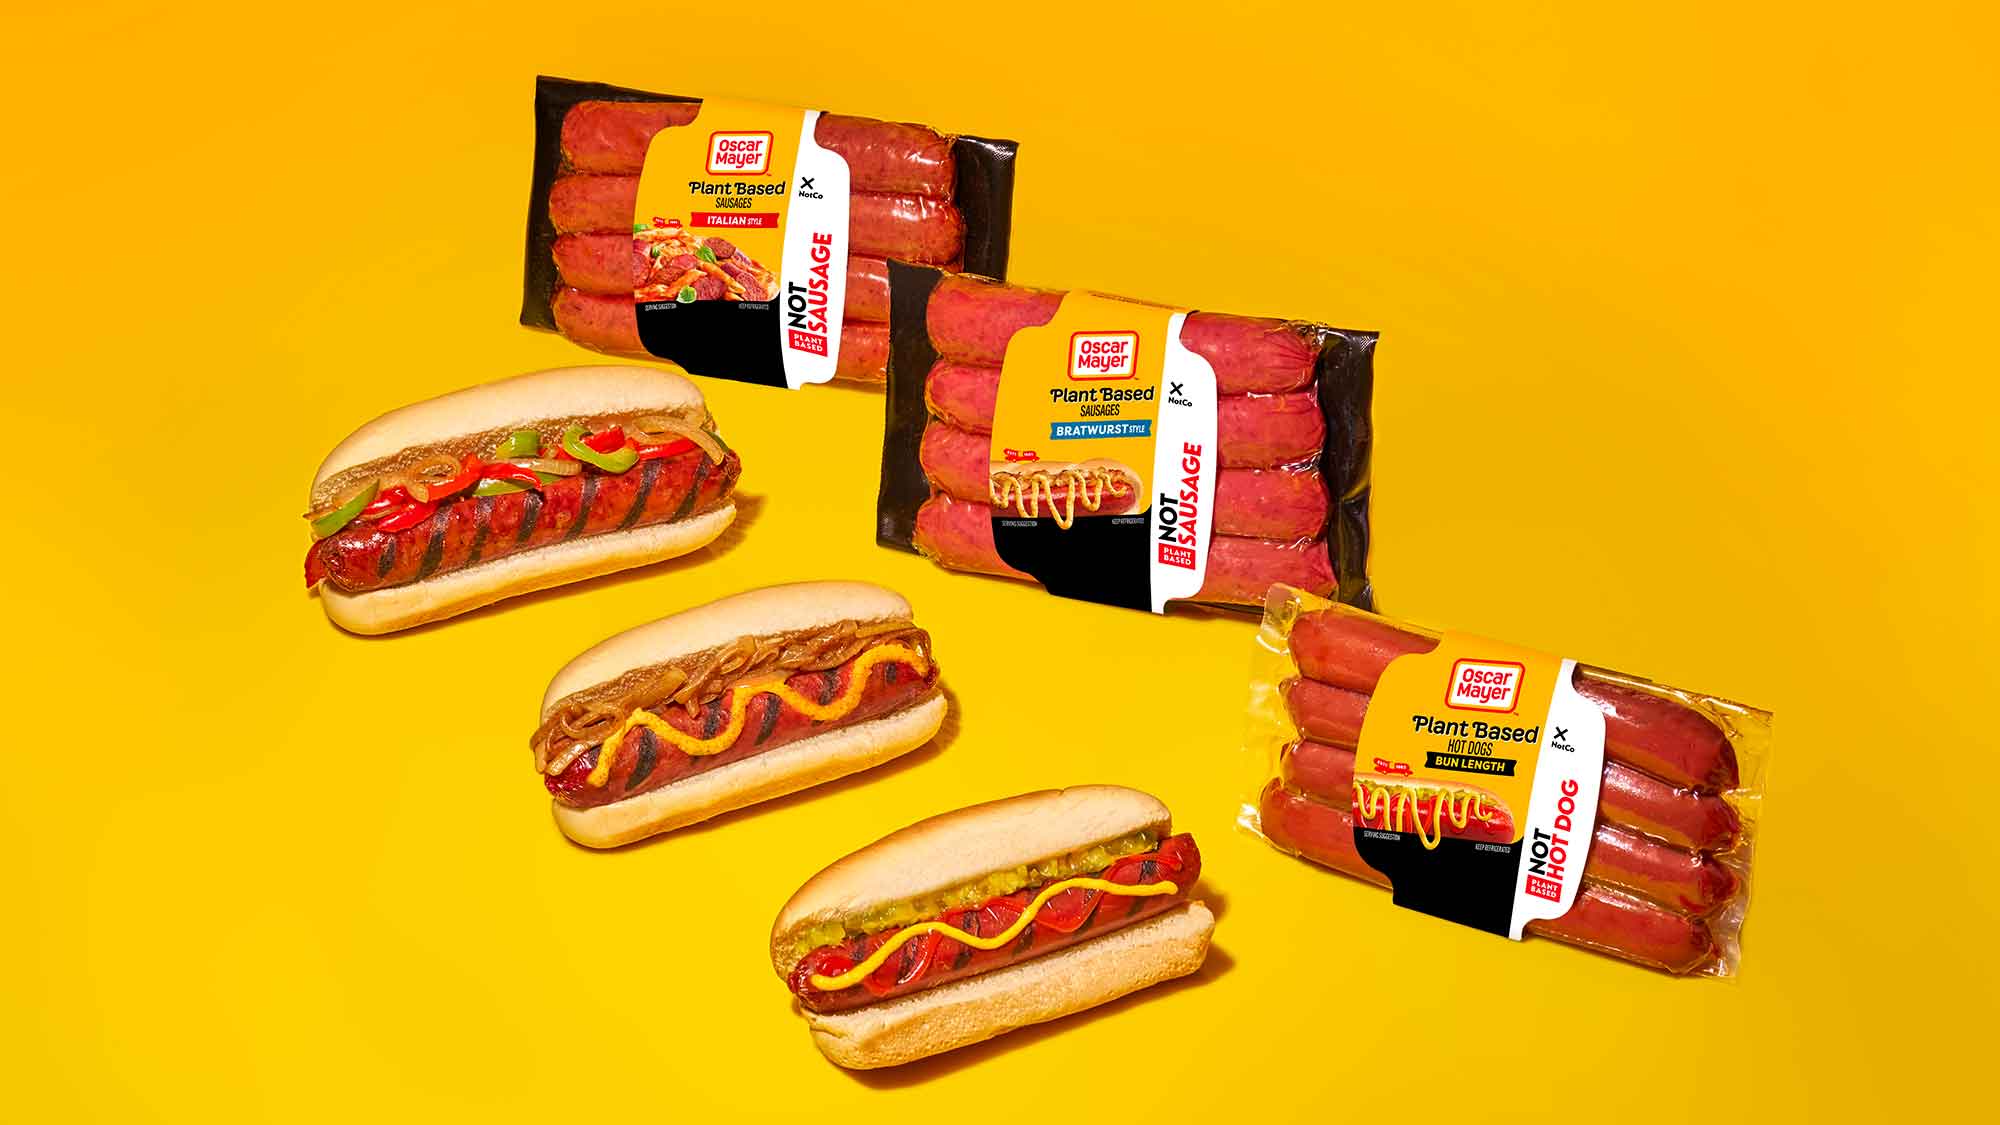 Hot Dog! The Kraft Heinz Not Company Launches First Ever, Plant Based Oscar Mayer Hot Dogs and Sausages